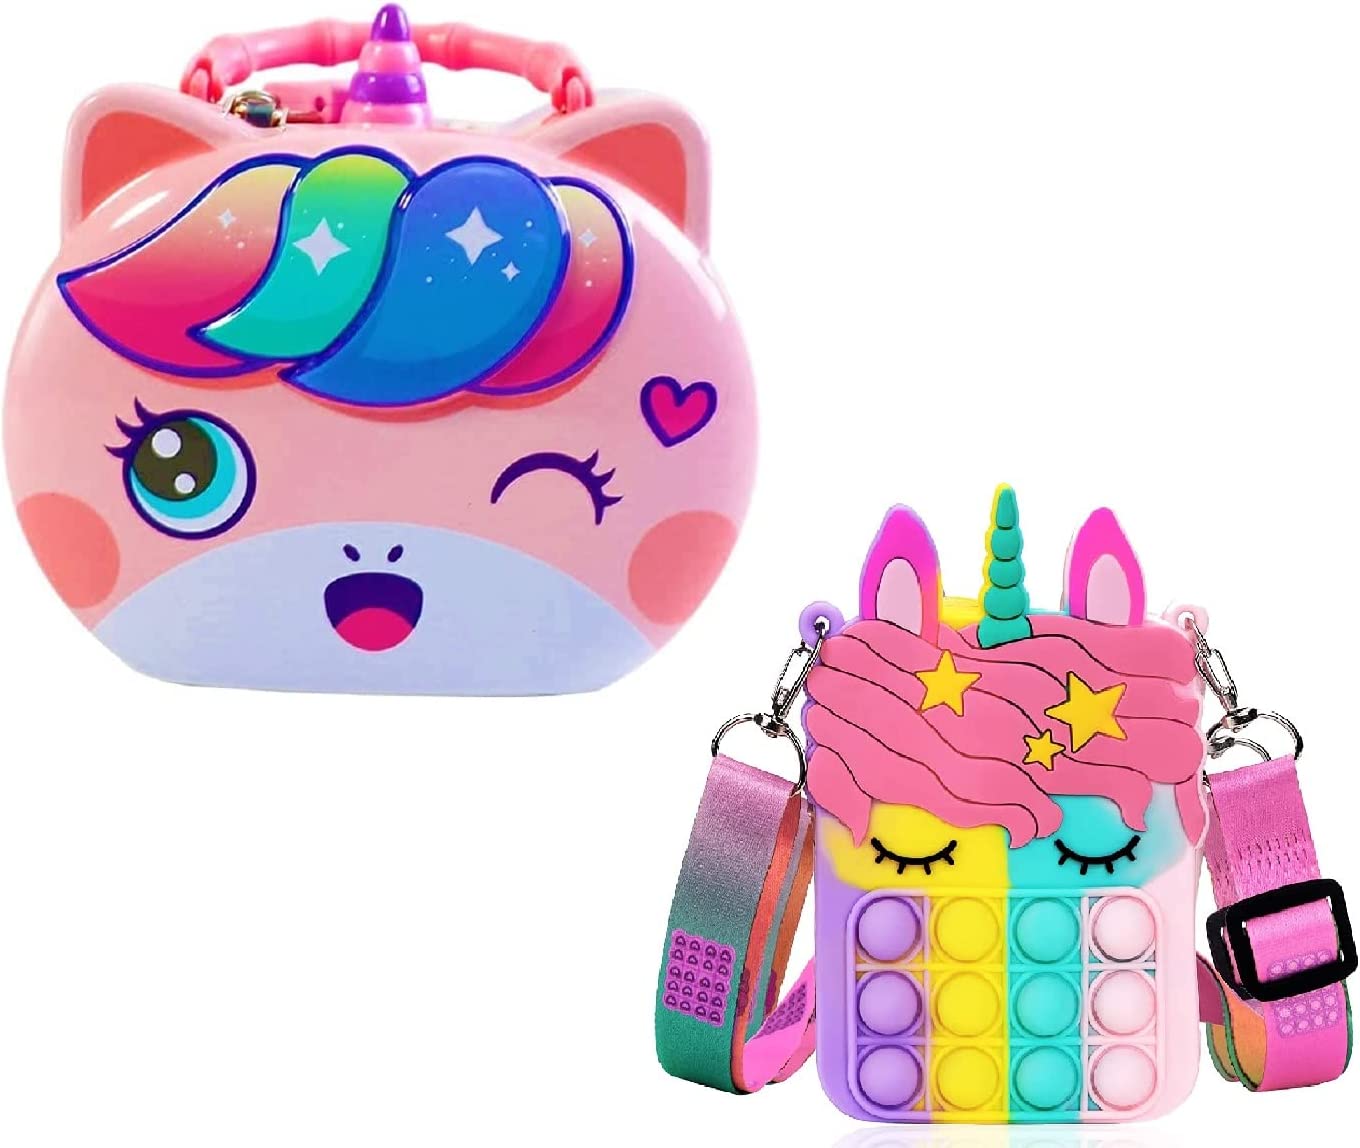 FunBlast Unicorn Pop it Sling Bag with Unicorn Coin Box for Kids - Pop it Purse for Girls, Stress Relief Toys Pop It Bag for Girls, Cartoon Toy Money Bank for Kids, (Pack of 2 Pcs; Random Color)